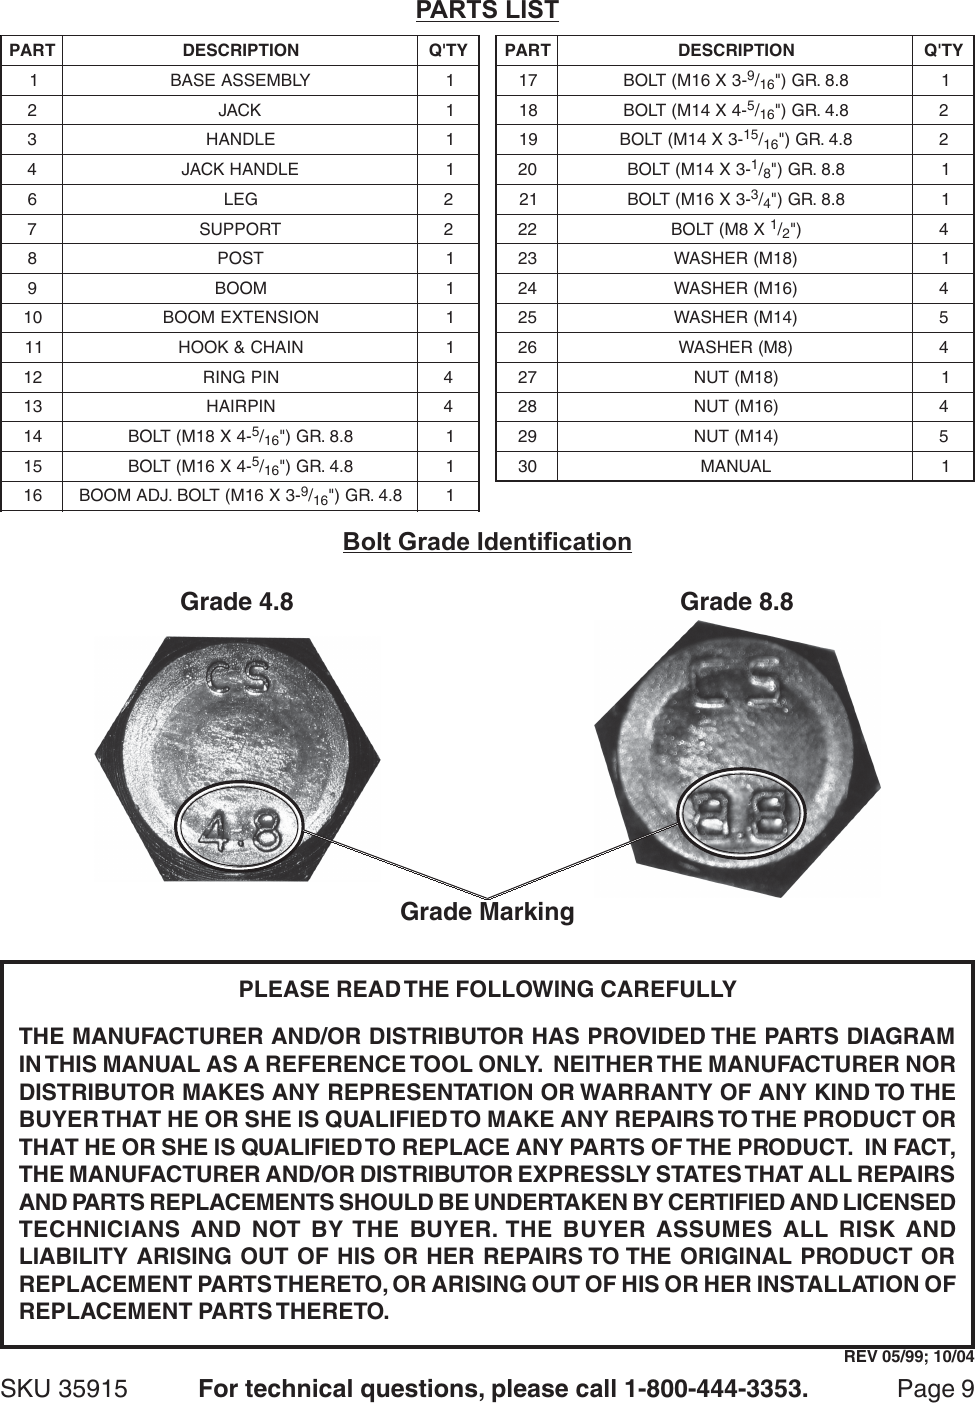 Page 9 of 11 - Central-Hydraulics Central-Hydraulics-2-Ton-Foldable-Shop-Crane-35915-Users-Manual- 35915 Jack Manual  Central-hydraulics-2-ton-foldable-shop-crane-35915-users-manual